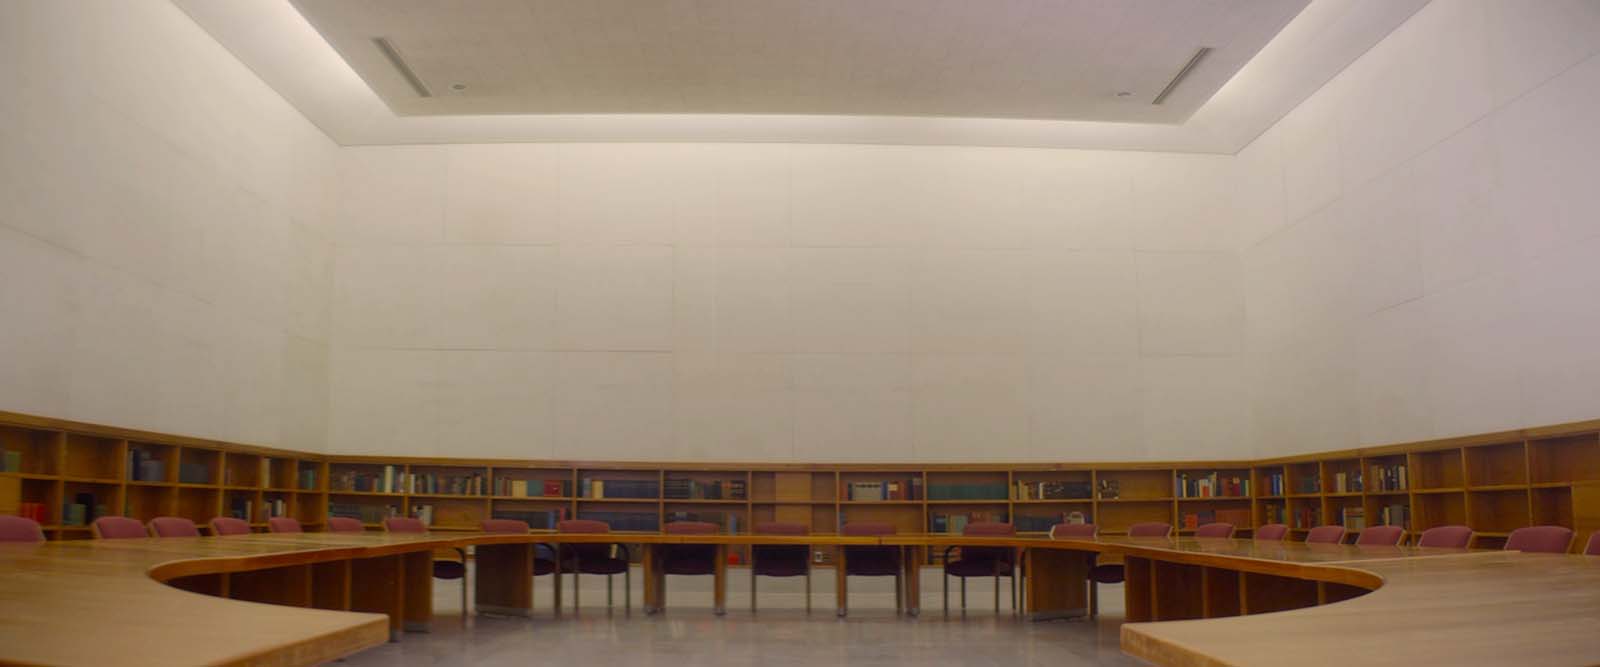 The Goodrich Room, Lilly Library